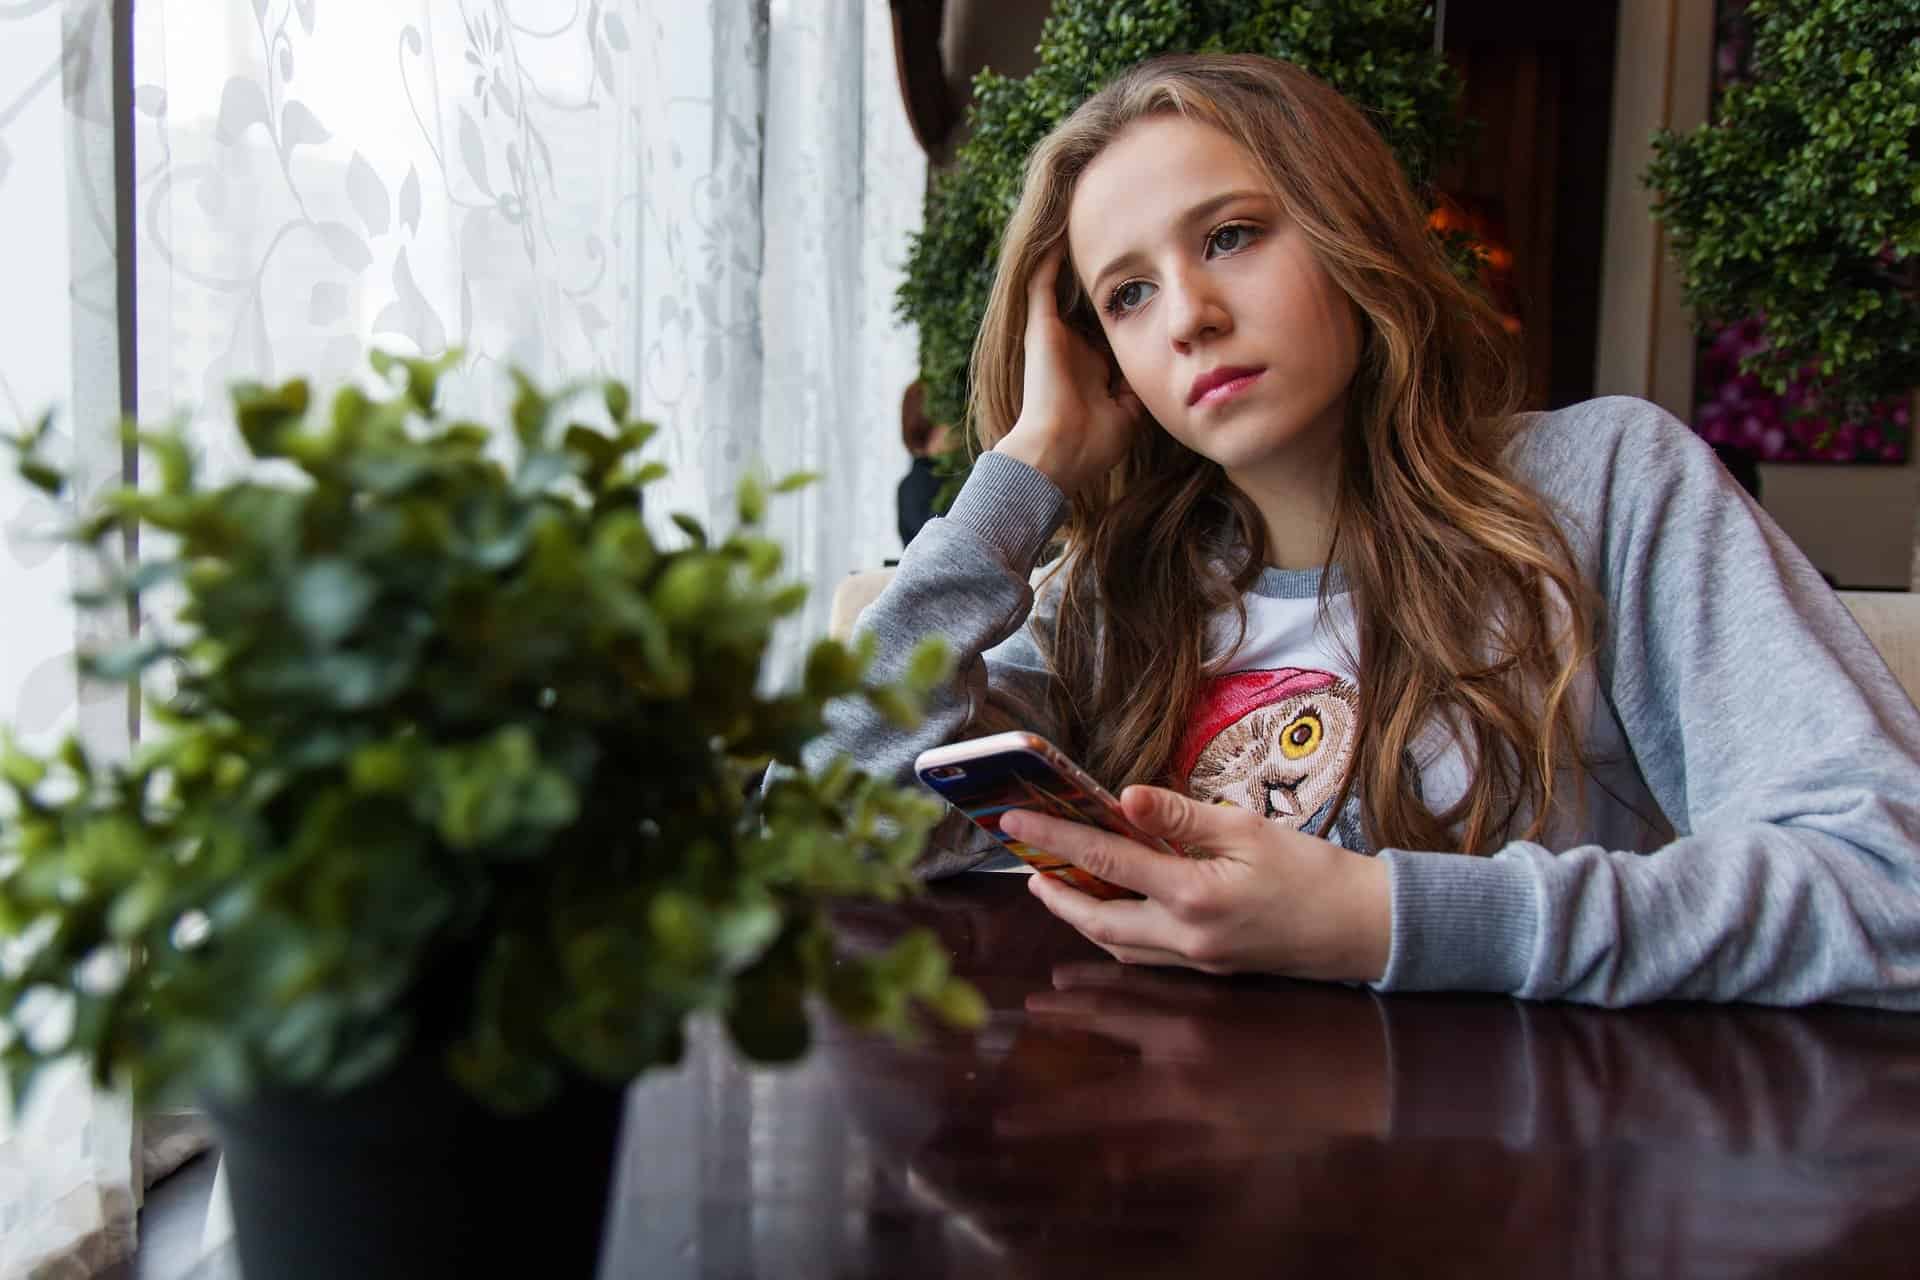 A young lady holding a phone leaning on her hand looking sad